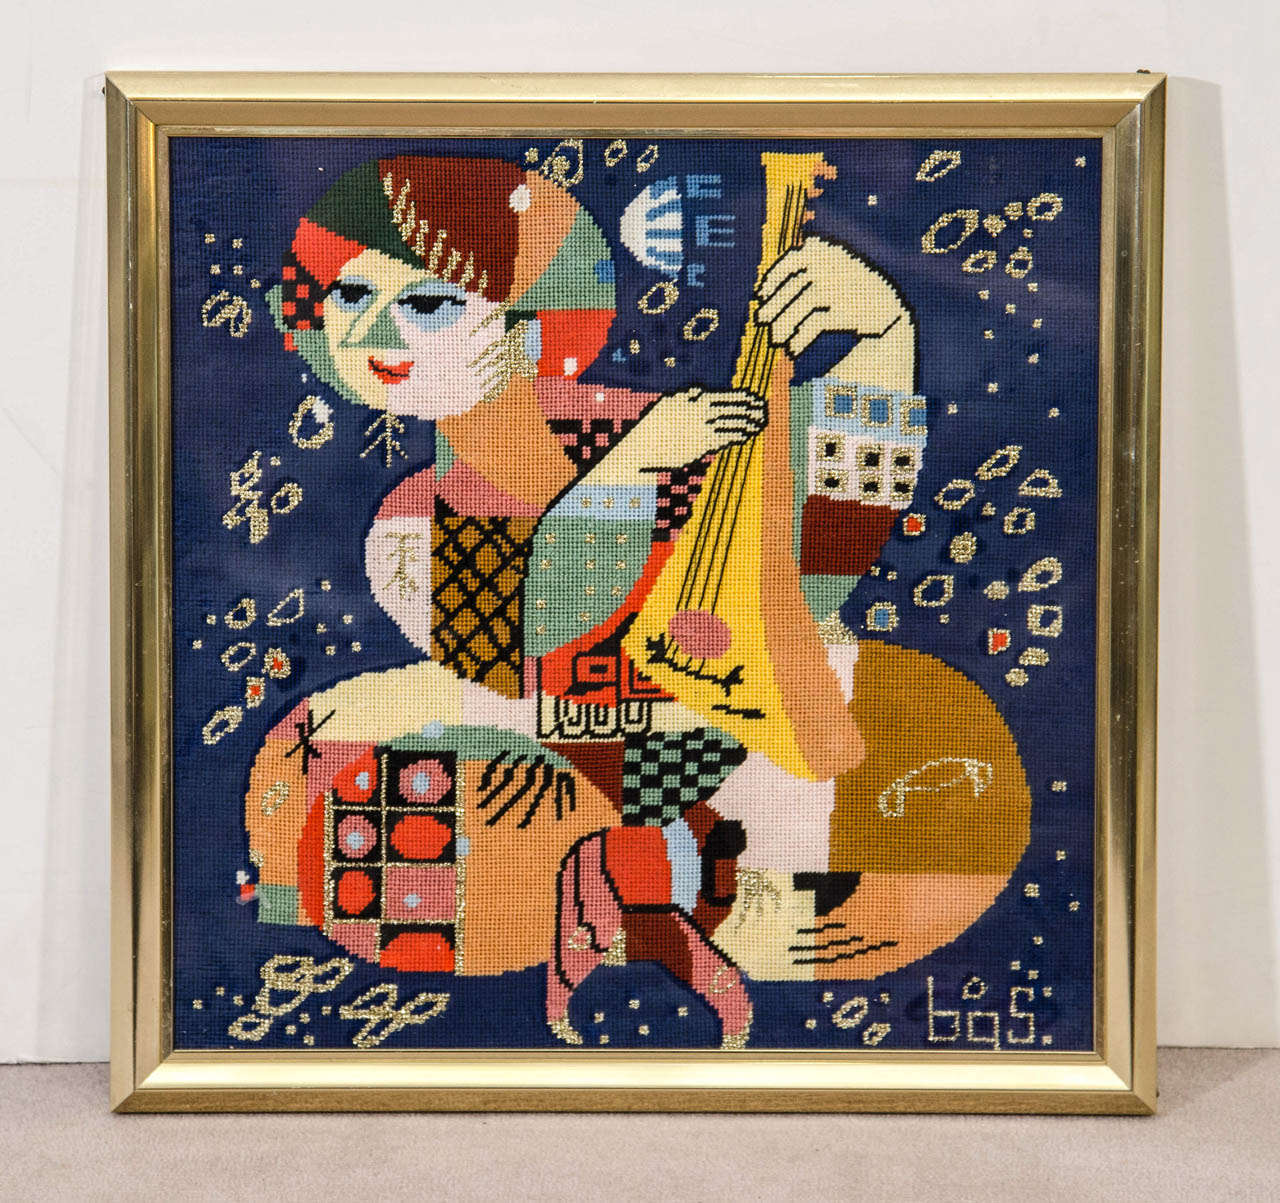 A vintage Wiinblad inspired needlepoint in a brass and glass frame depicting a musician. Good vintage condition with age appropriate wear.